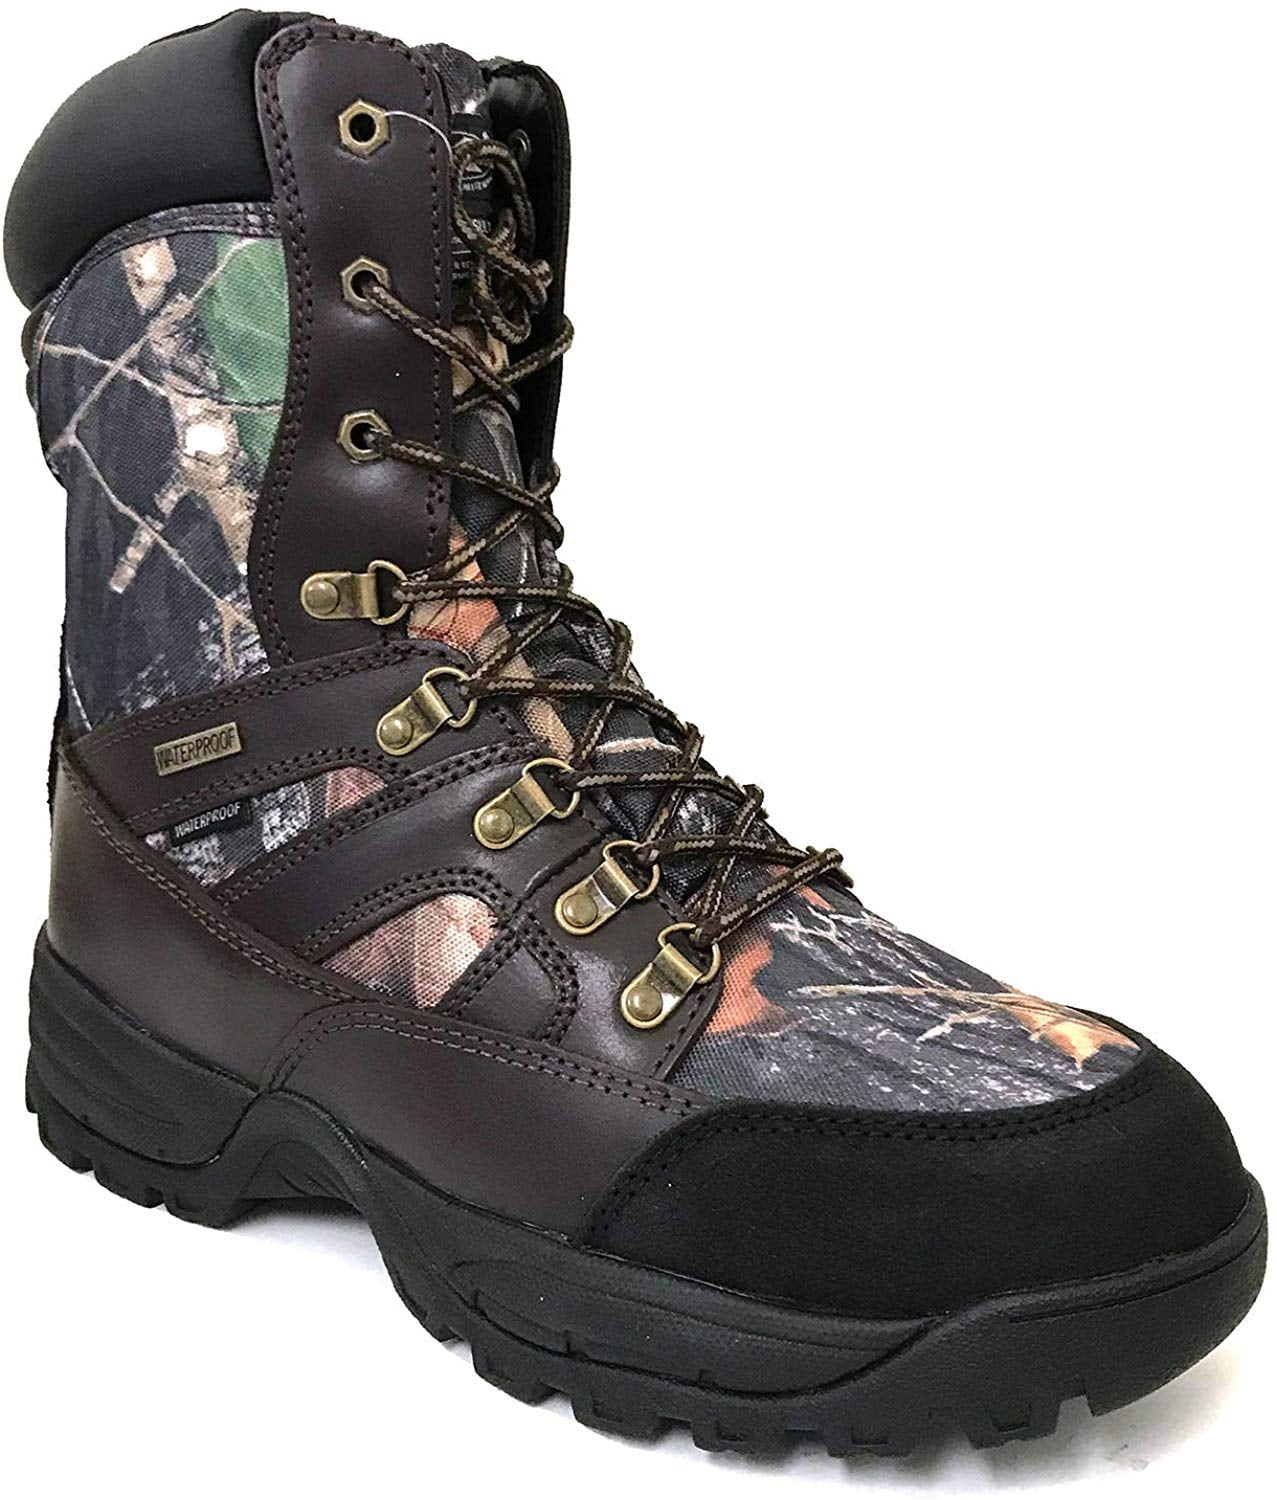 Men's Winter Snow Boots Camouflage Waterproof Insulated Hunting Hiking Shoes New